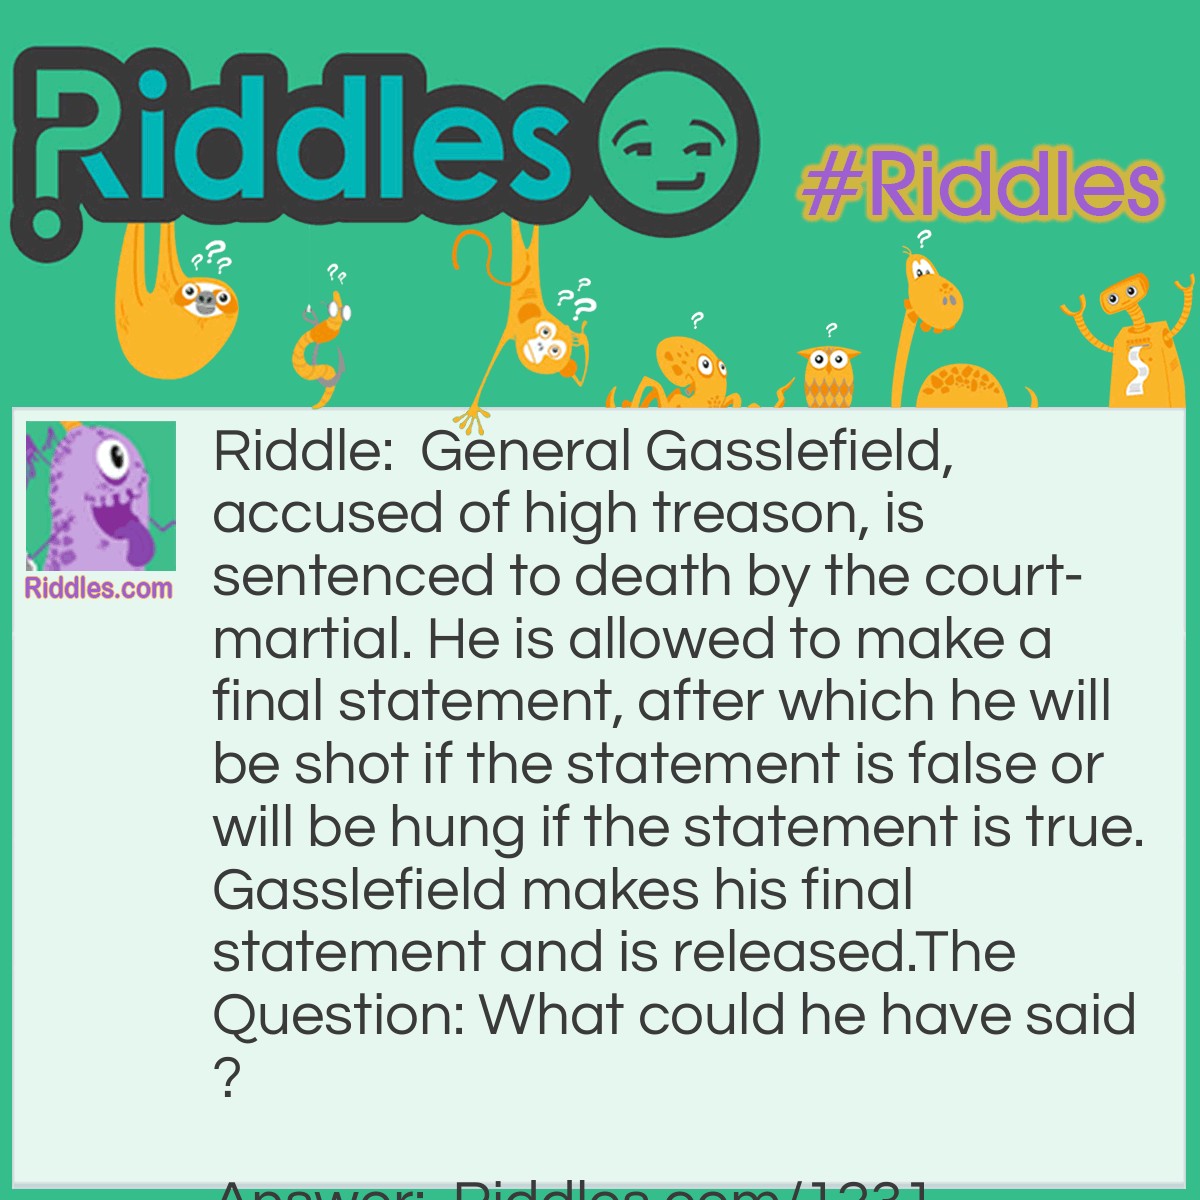 Riddle: General Gasslefield, accused of high treason, is sentenced to death by the court-martial. He is allowed to make a final statement, after which he will be shot if the statement is false or will be hung if the statement is true. Gasslefield makes his final statement and is released.
The Question: What could he have said? Answer: General Gasslefield said: "I will be shot." If this statement was true, he would have been hung and thus not be shot. But then his statement would be false, which implies that he should be shot, making the statement true again, etc... In other words: the verdict of the court-martial could not be executed and the general was released.